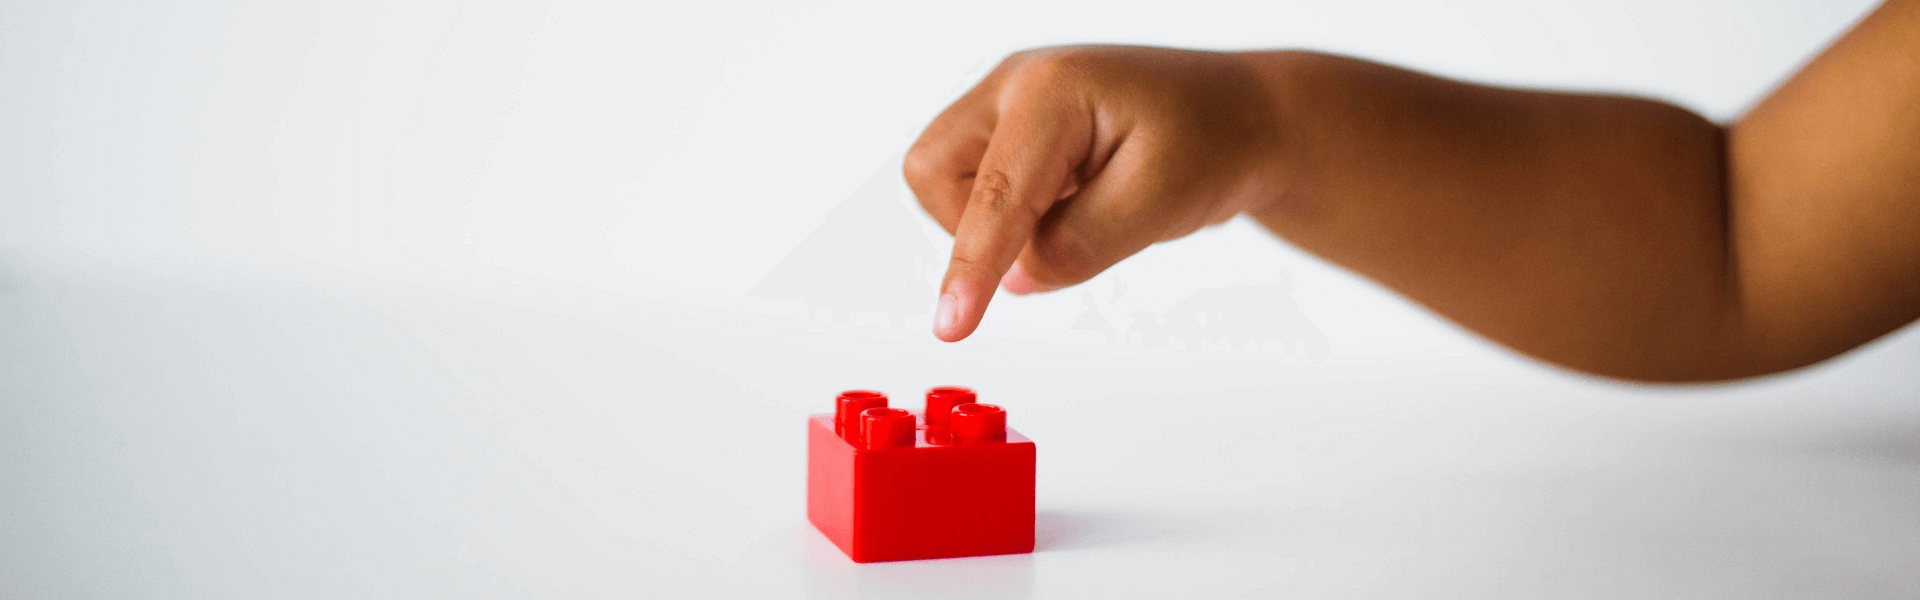 A child extends an index finger over a red plastic building block like he or she is going to touch the top of the building block.